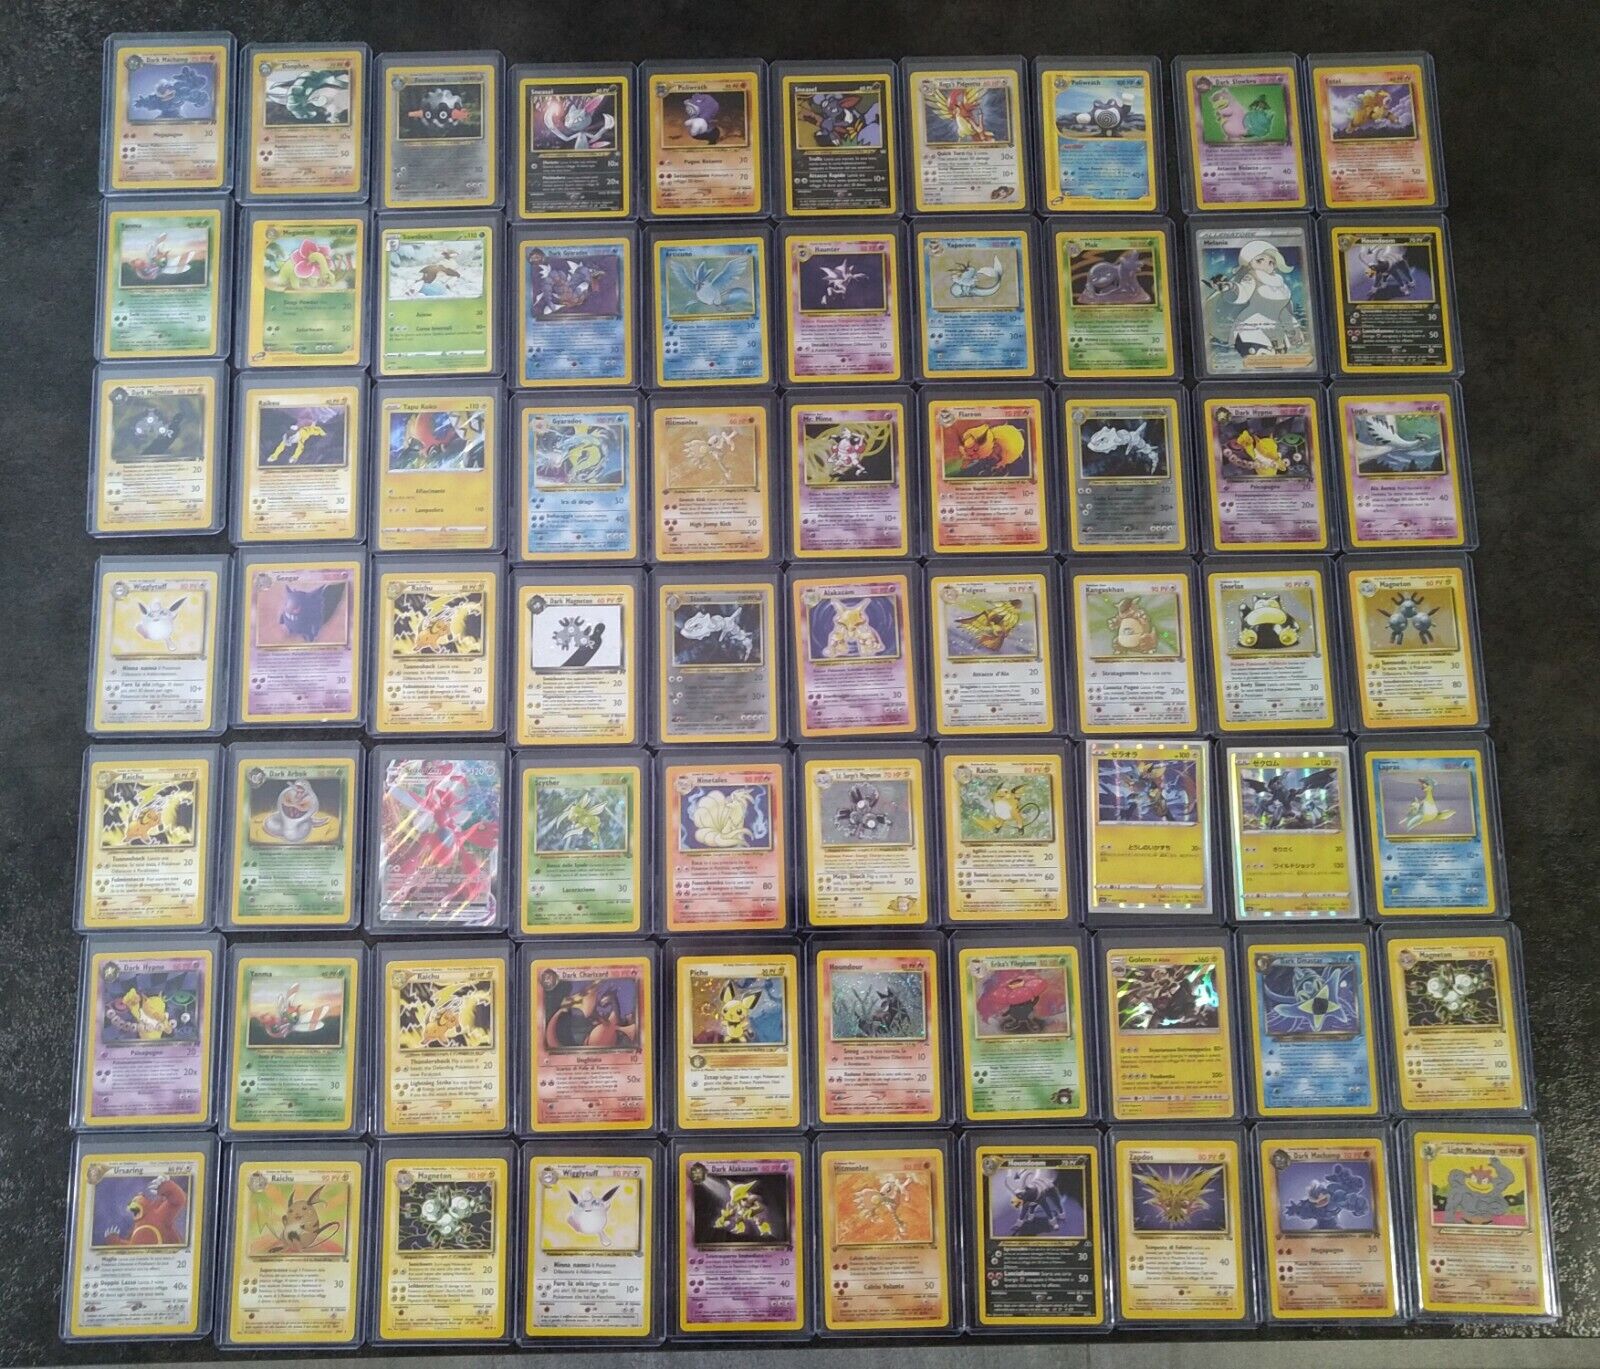 Pokemon - over 600 rare cards. Shining and Legendary Charizard Included. 